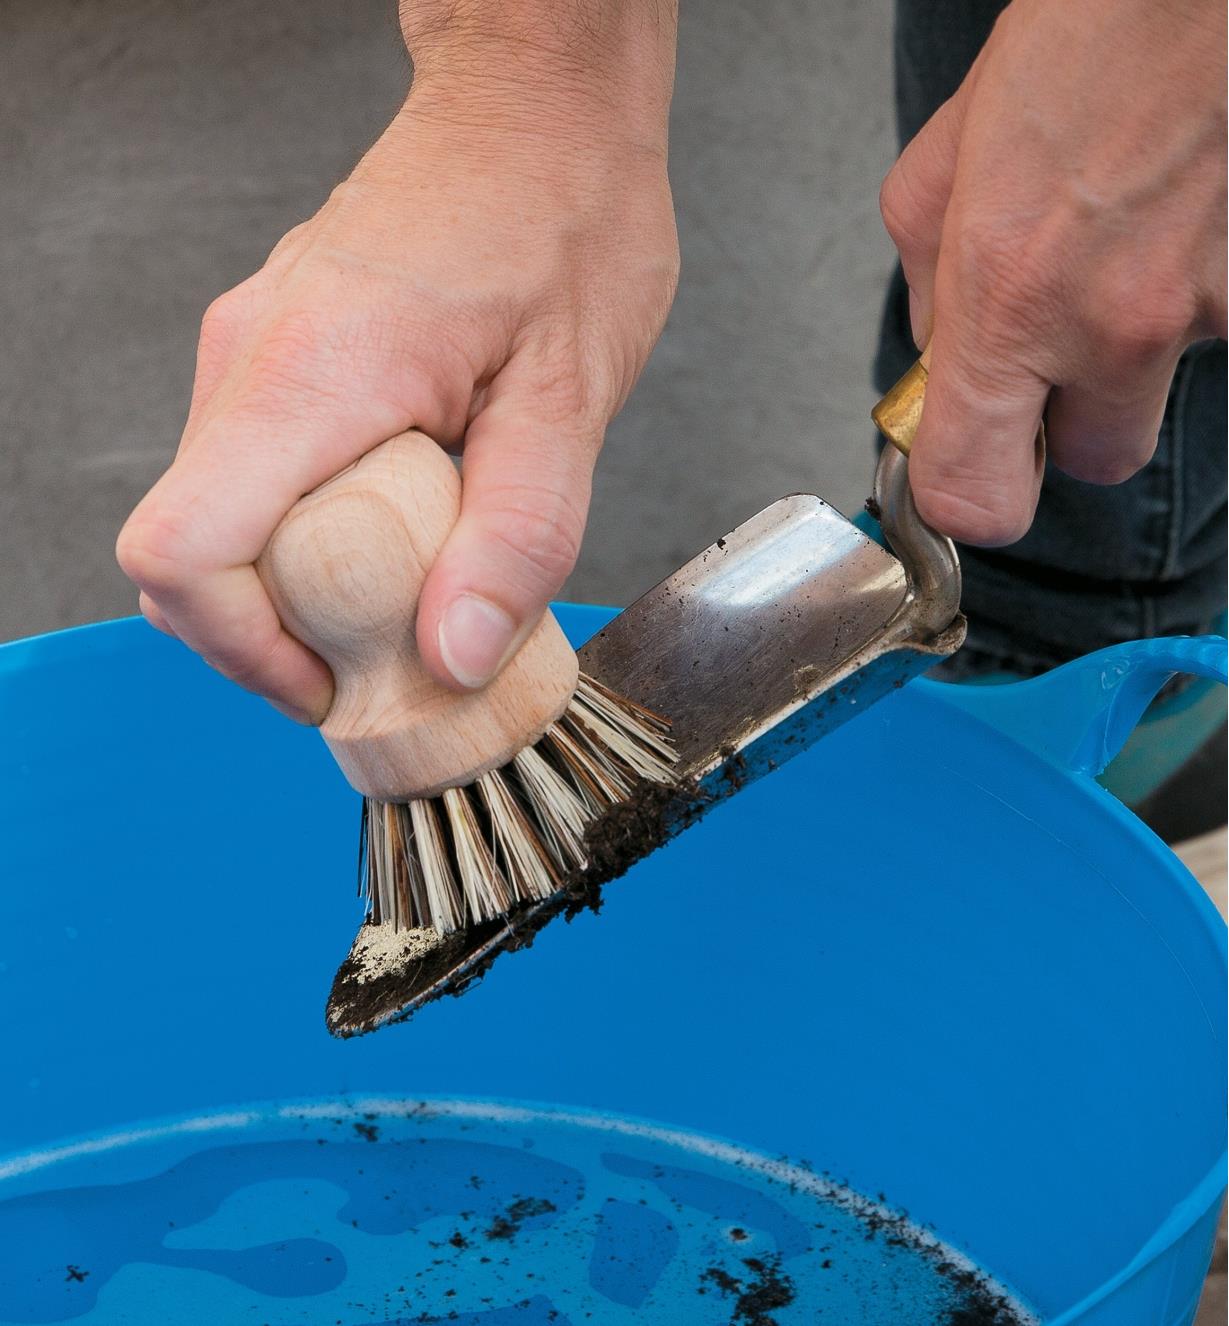 Using the scouring brush to clean a trowel